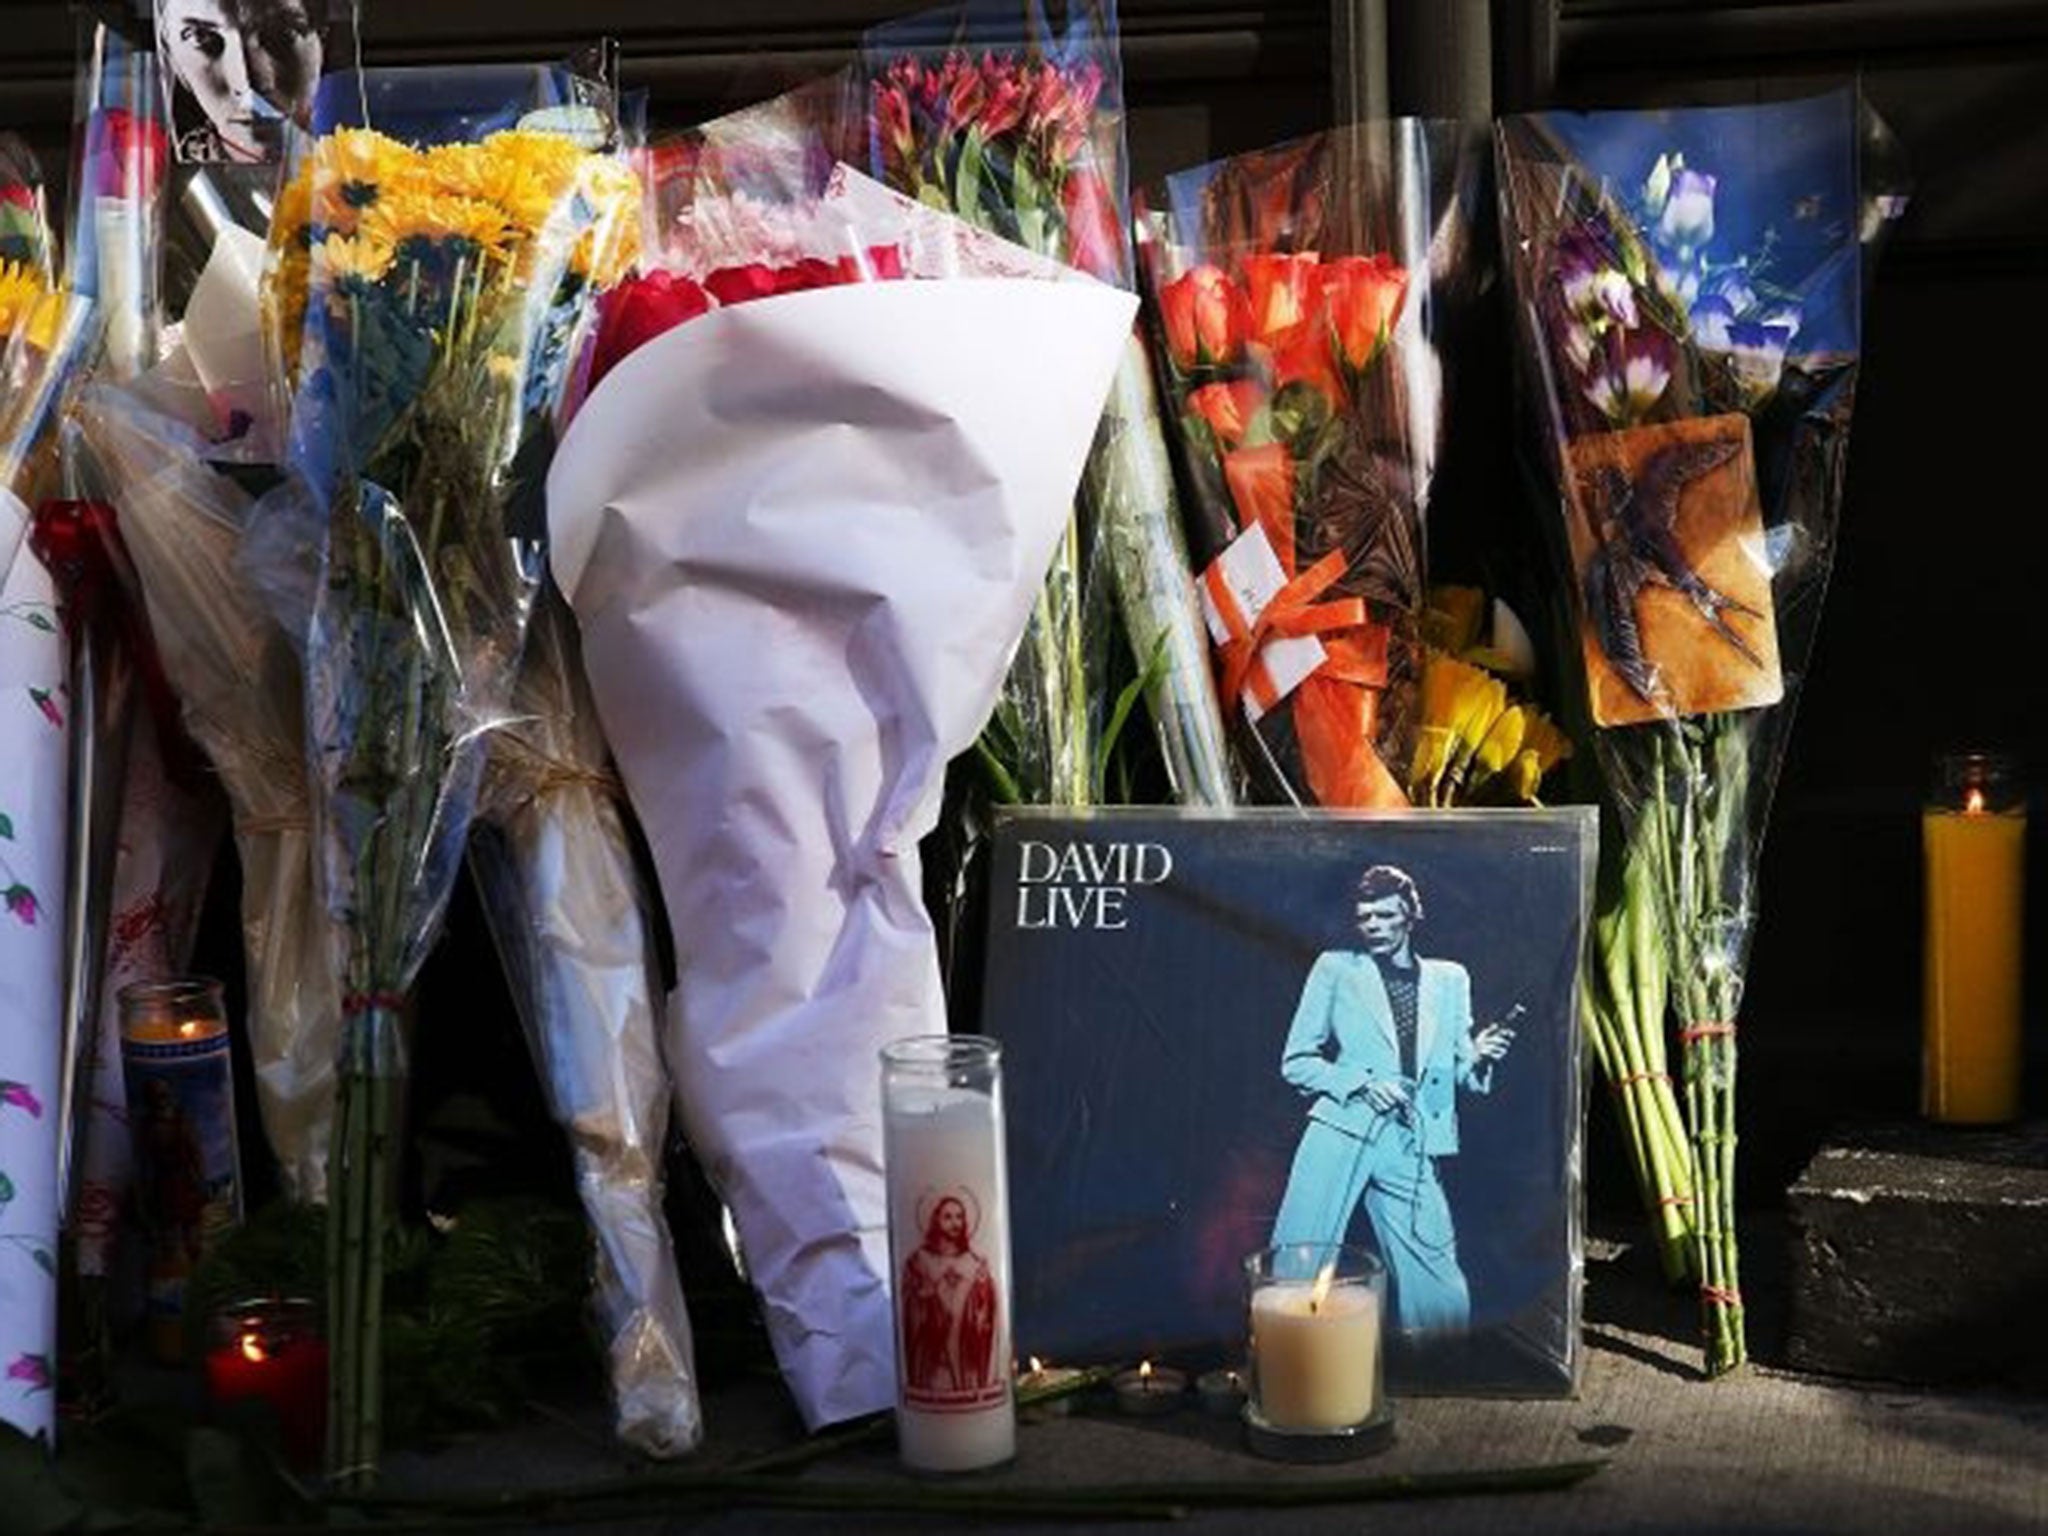 Flowers, candles and pictures are some of the items deposited at a memorial outside of the late musician and performer David Bowie's apartment that he shared with his wife in New York City